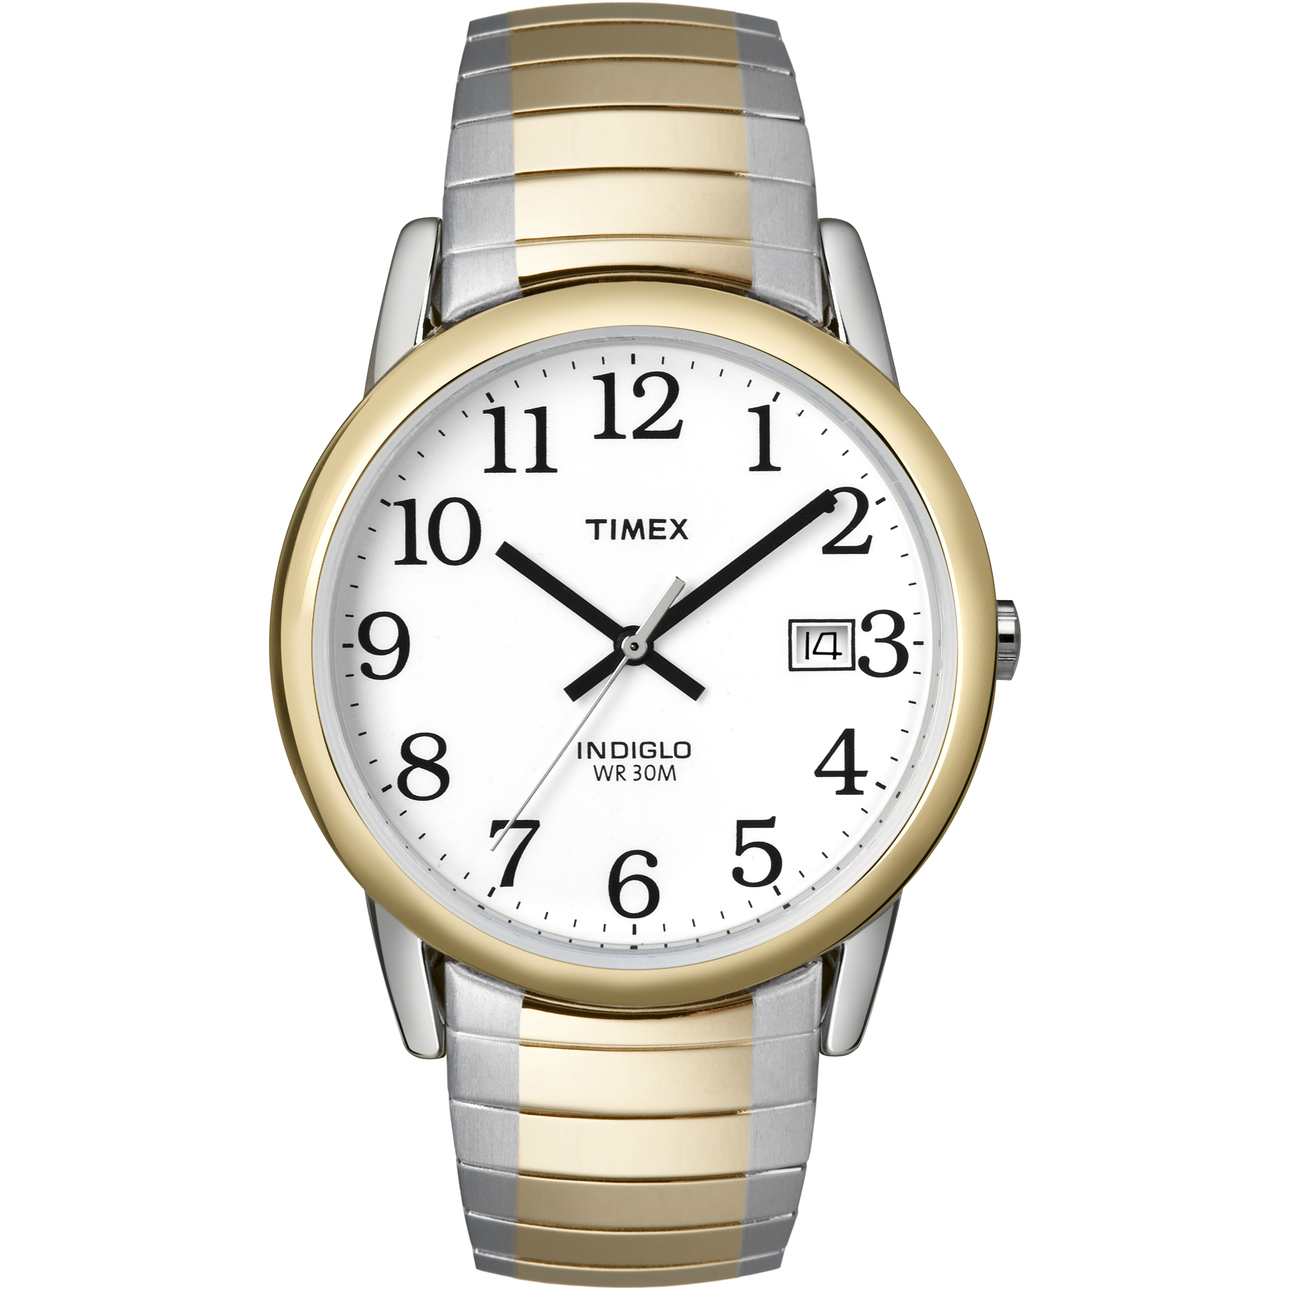 Timex Men's Easy Reader Date Two-Tone/White 35mm Casual Watch, Tapered Expansion Band - image 1 of 3